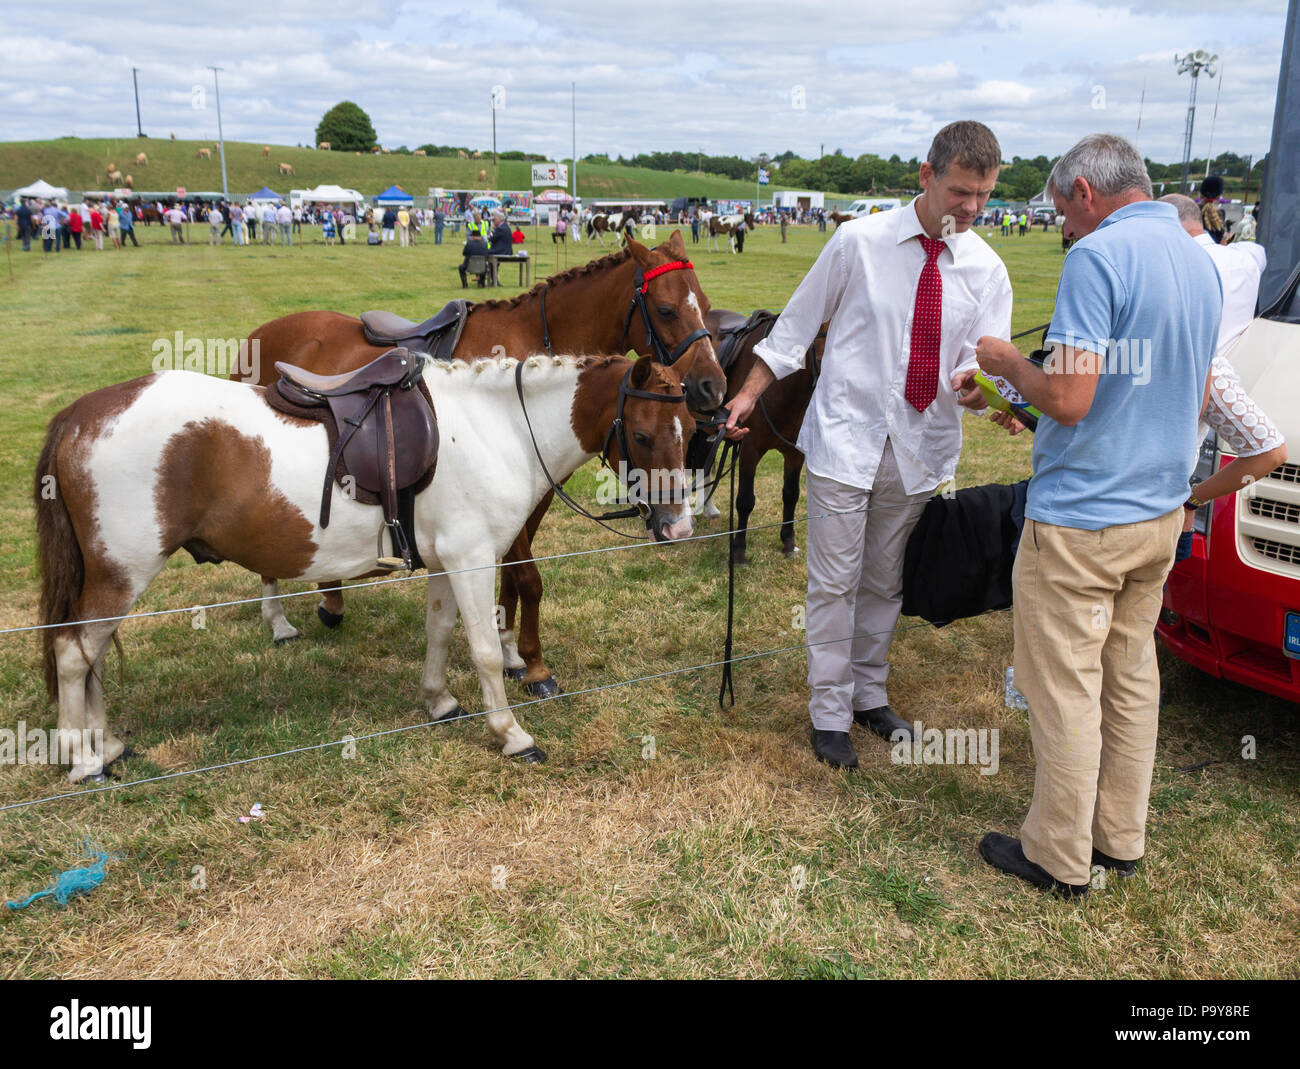 rural cattle and horse show and livestock competition in west cork, Ireland Stock Photo